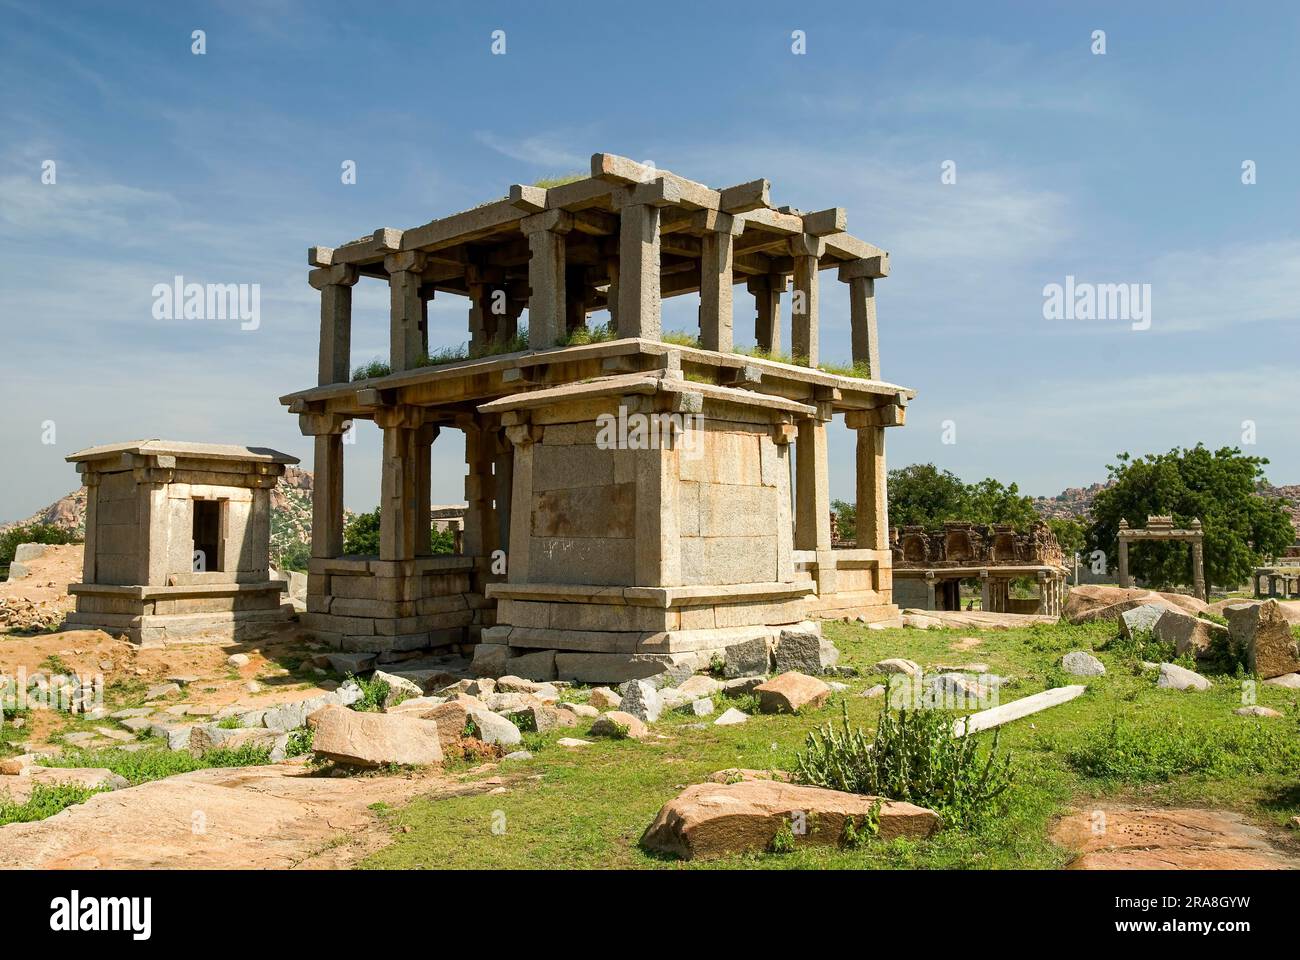 One of several 15th century gateways, with multiple stories in Hampi, Karnataka, South India, India, Asia. UNESCO World Heritage Site Stock Photo